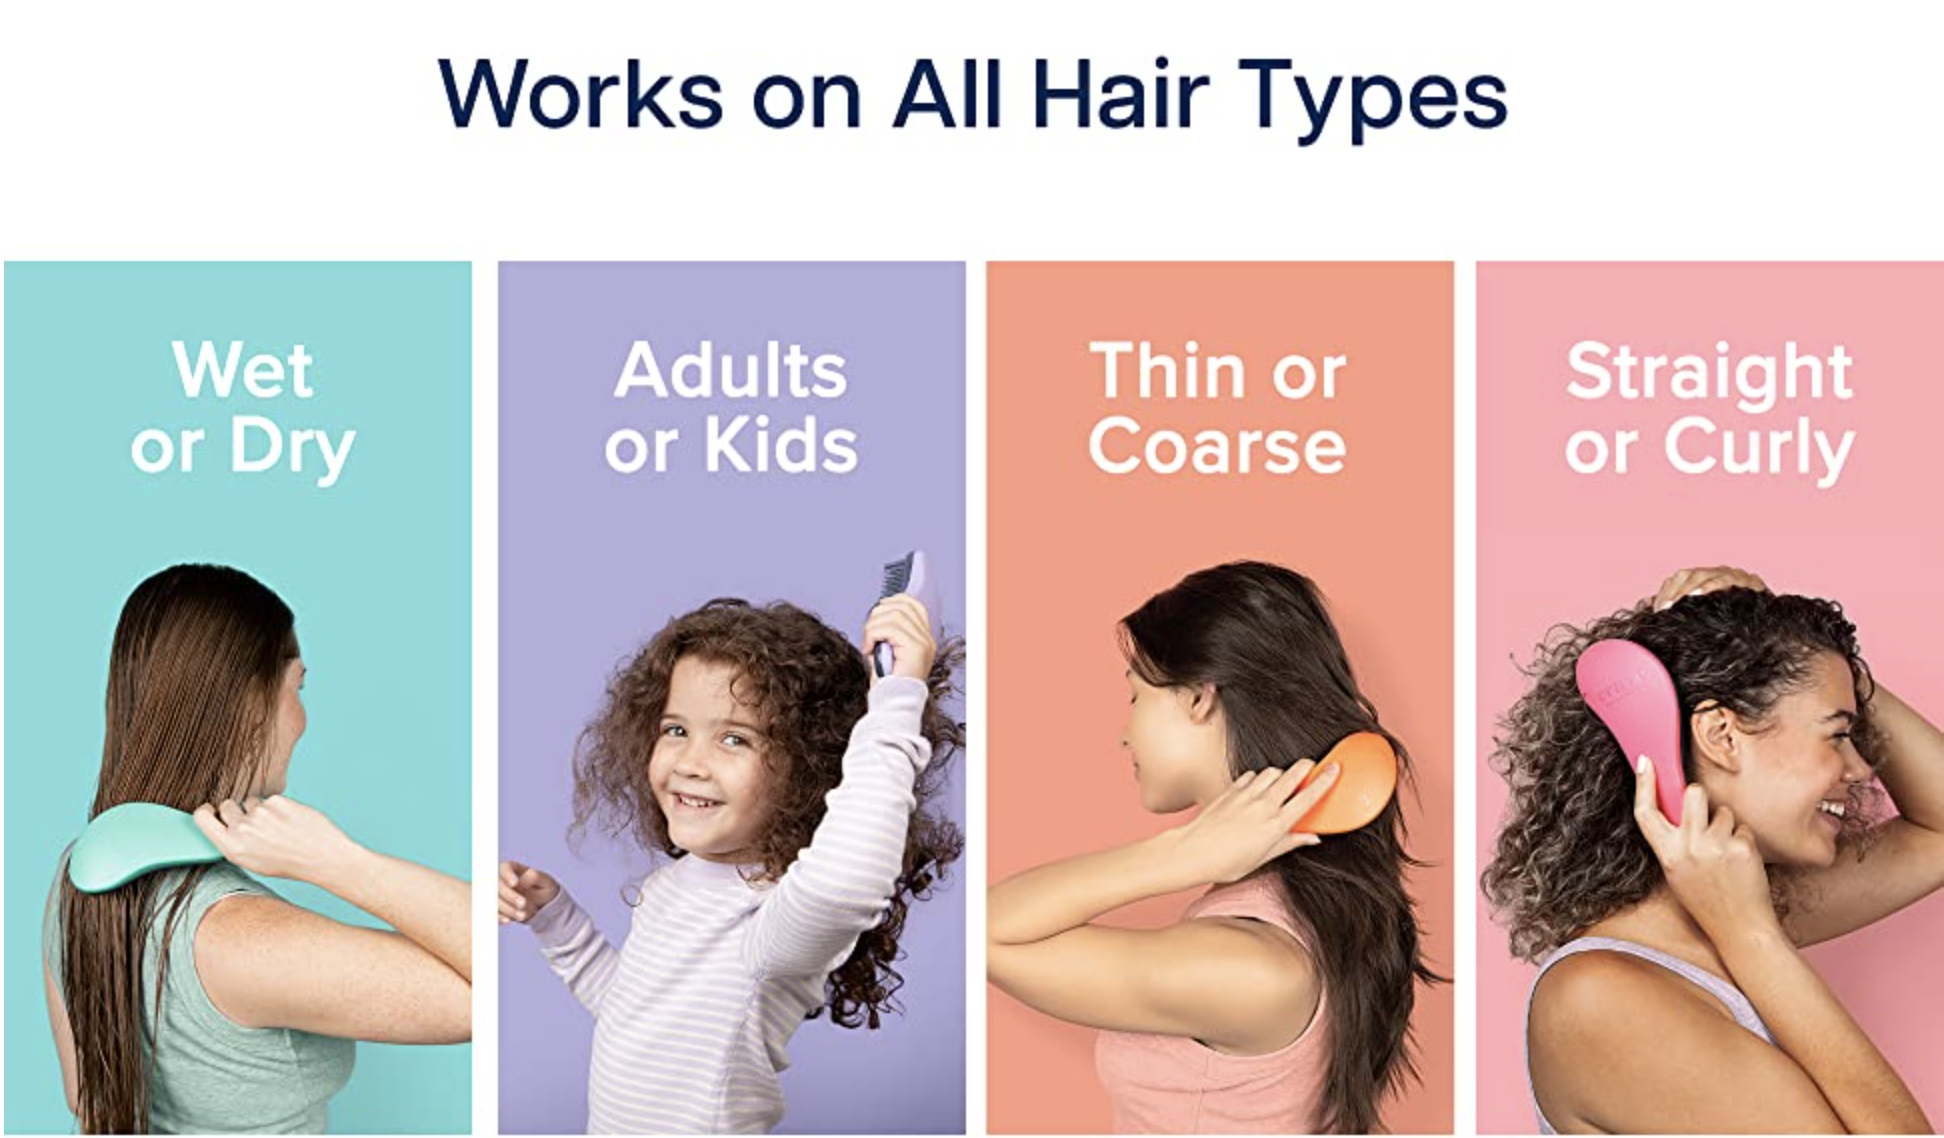 showing all hair types it works for: wet or dry, adults or kids, thin or coarse, straight or curly